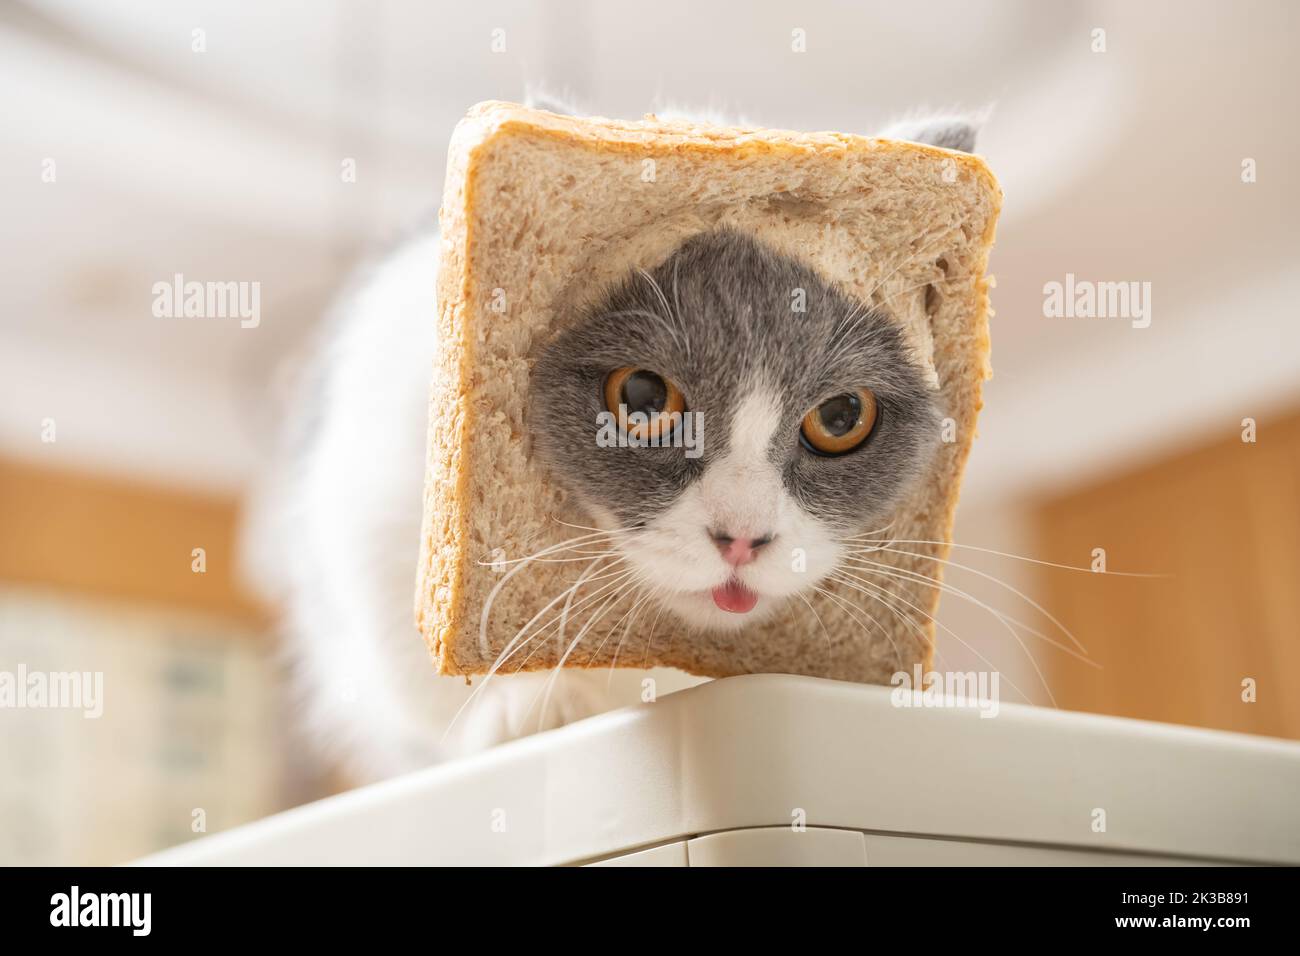 cut british shorthair cat with slice of bread on the head in a living room Stock Photo